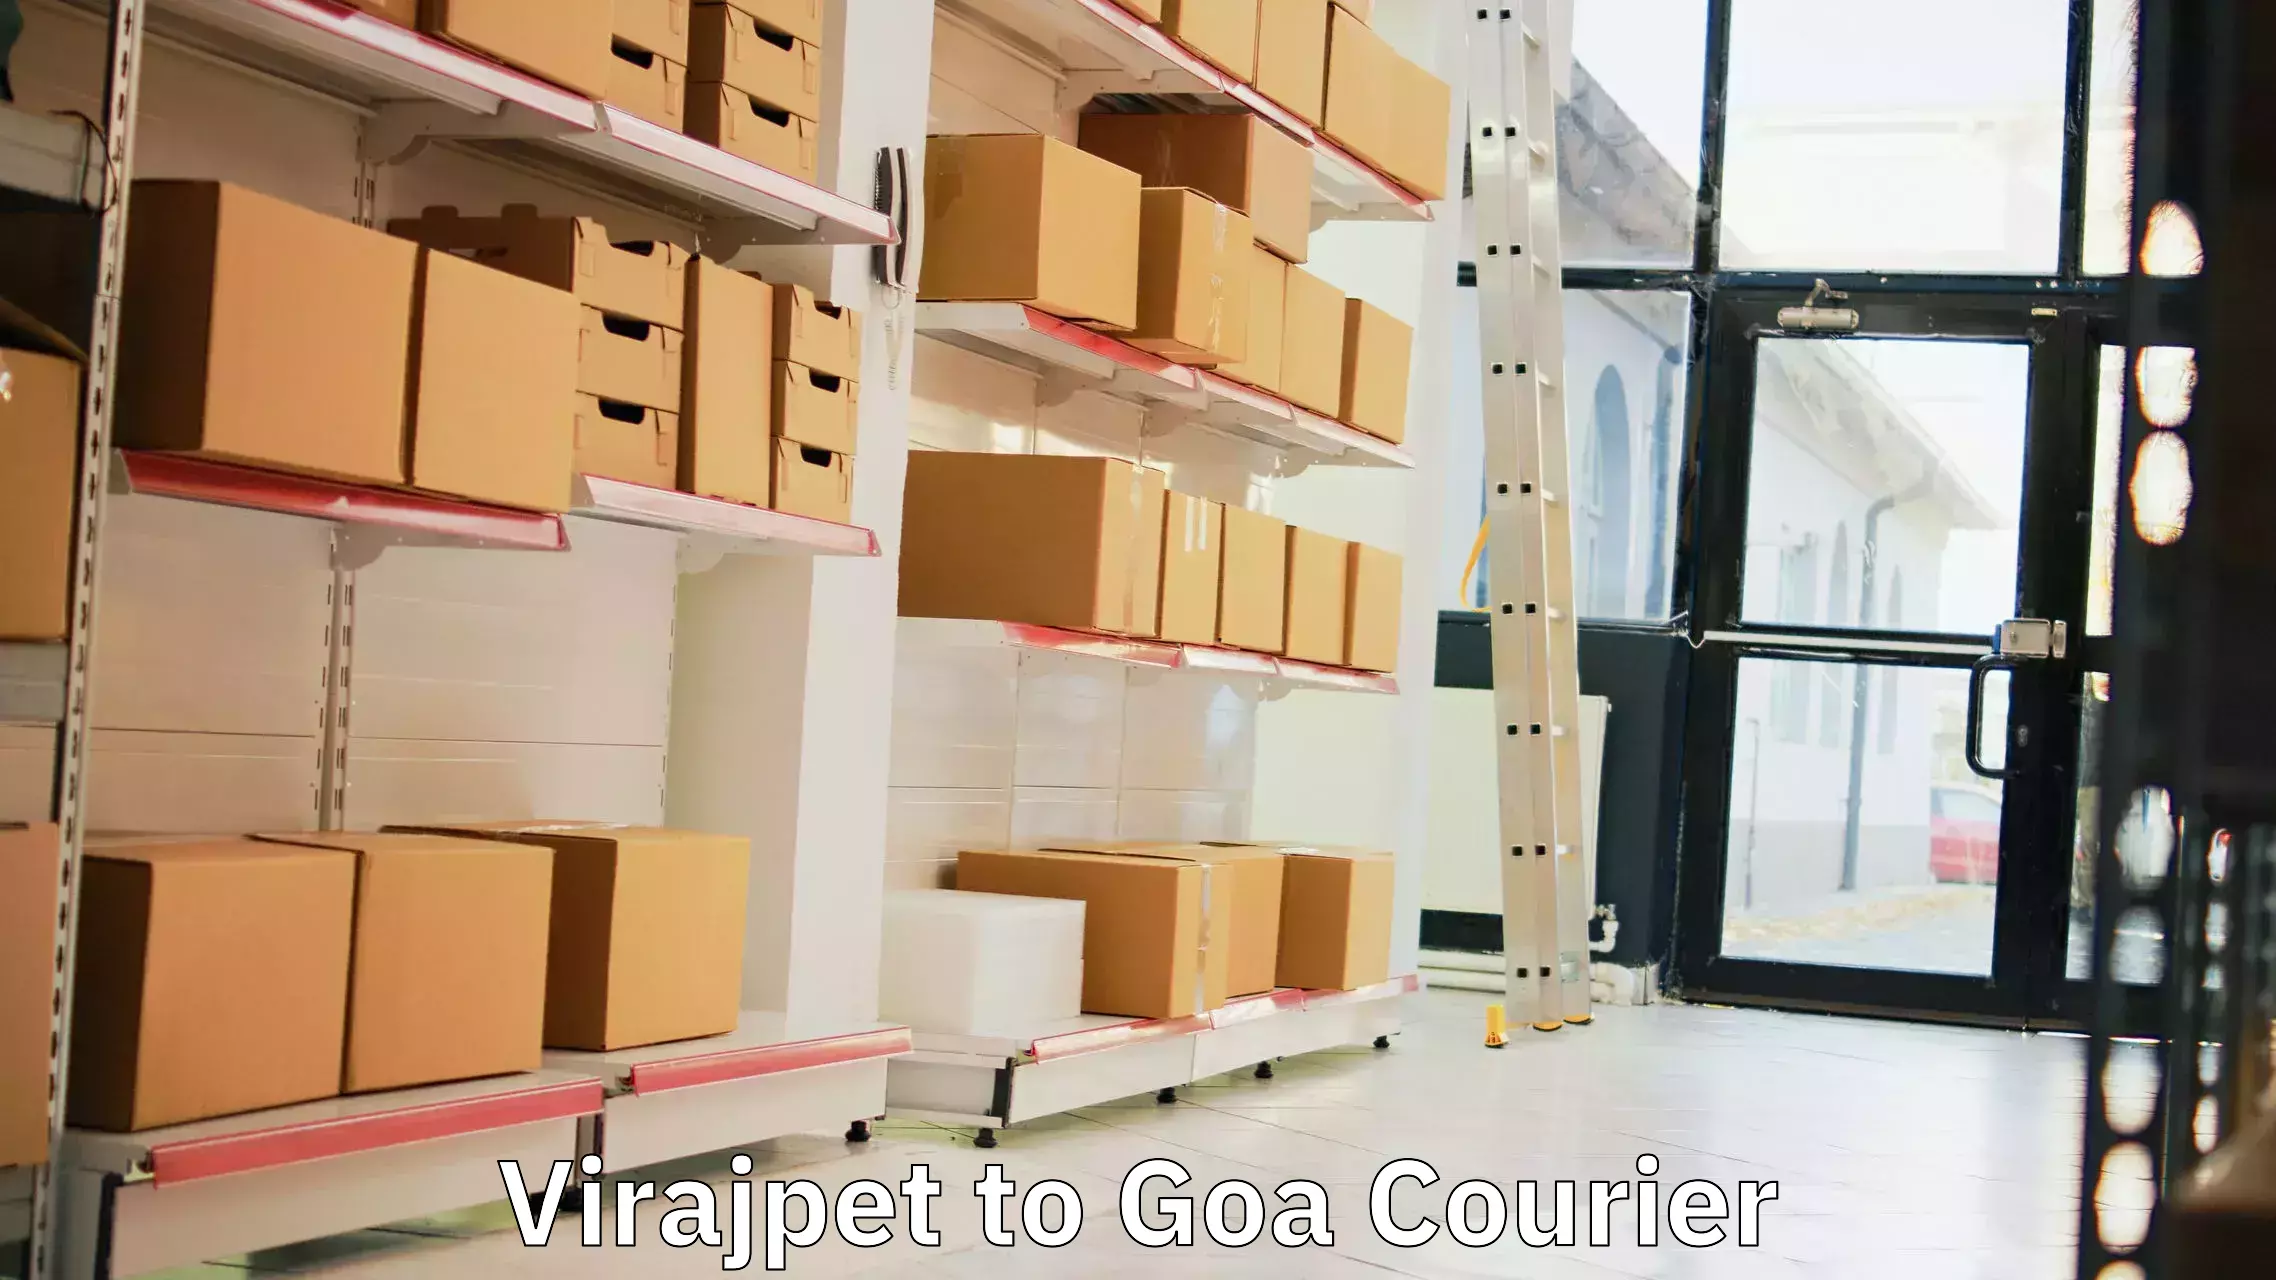 Courier service innovation Virajpet to Goa